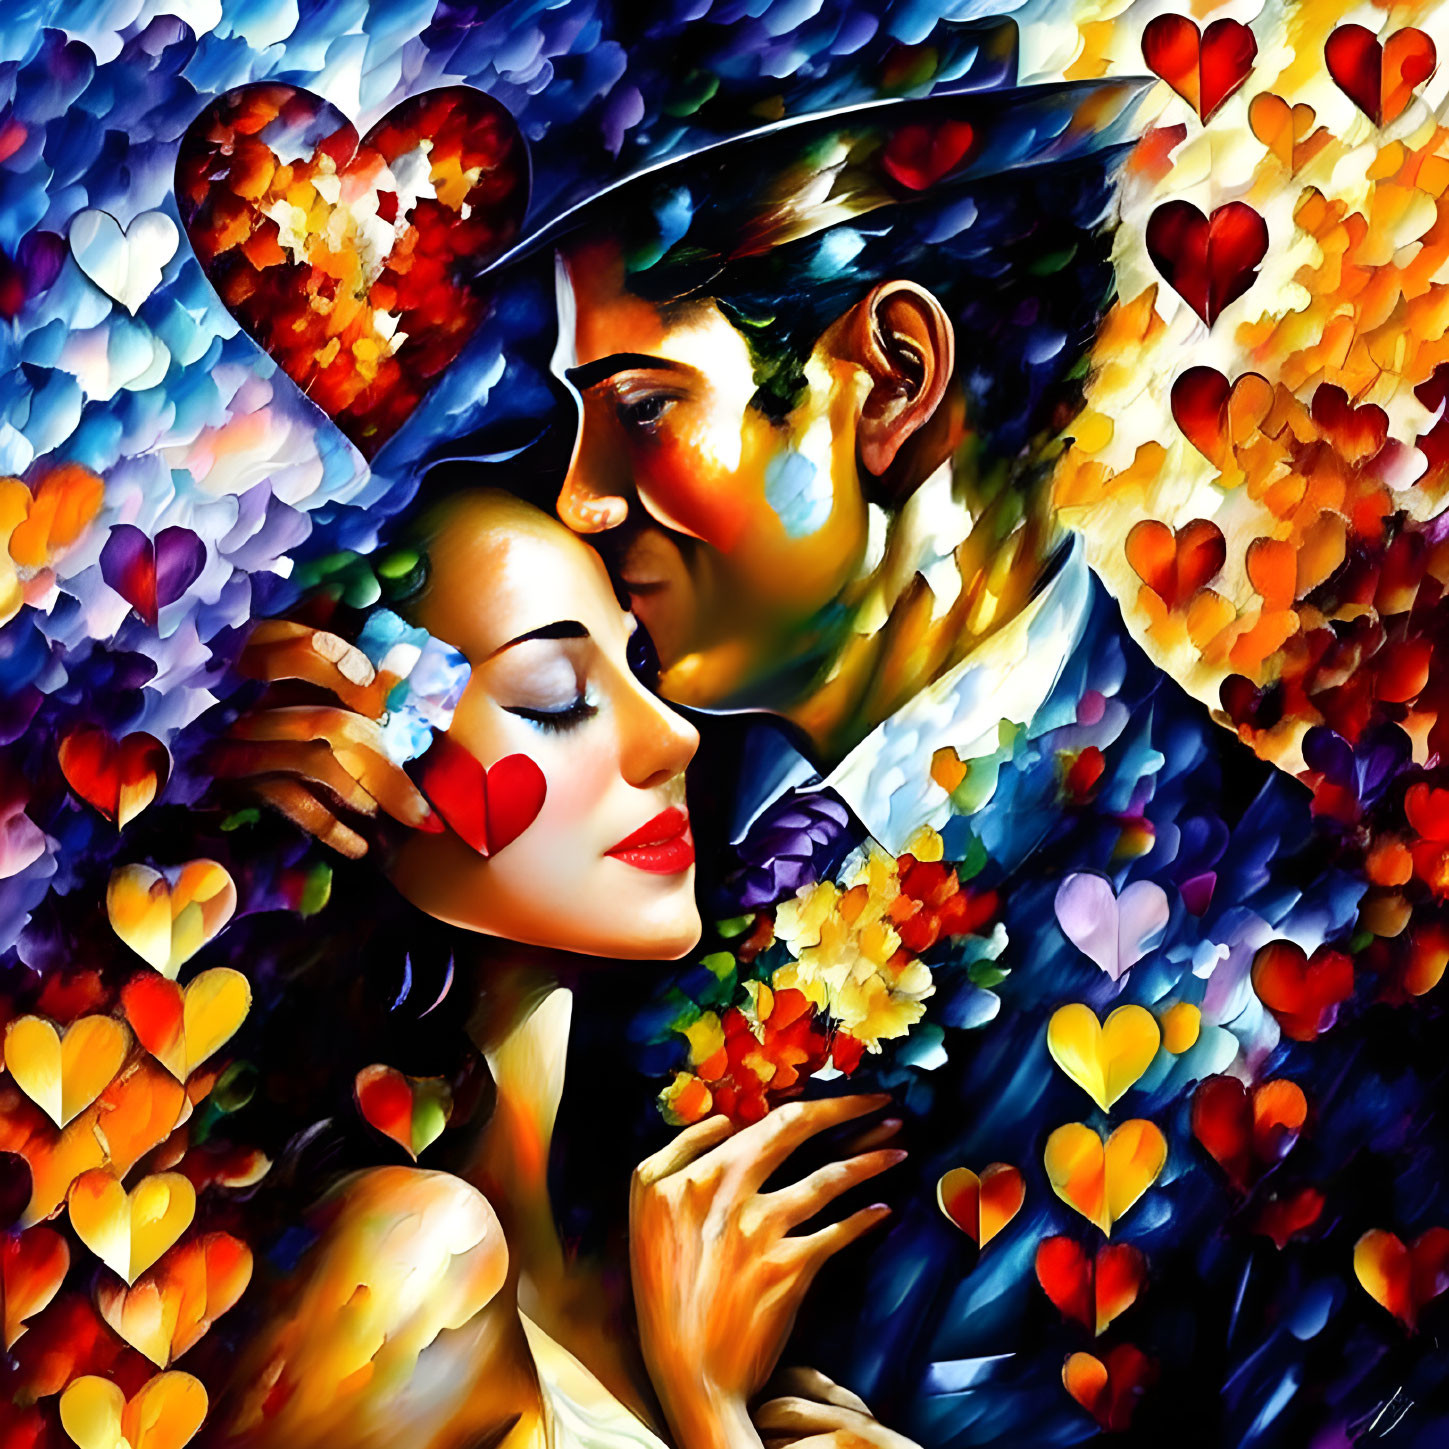 Romantic Couple Embracing Surrounded by Vibrant Hearts